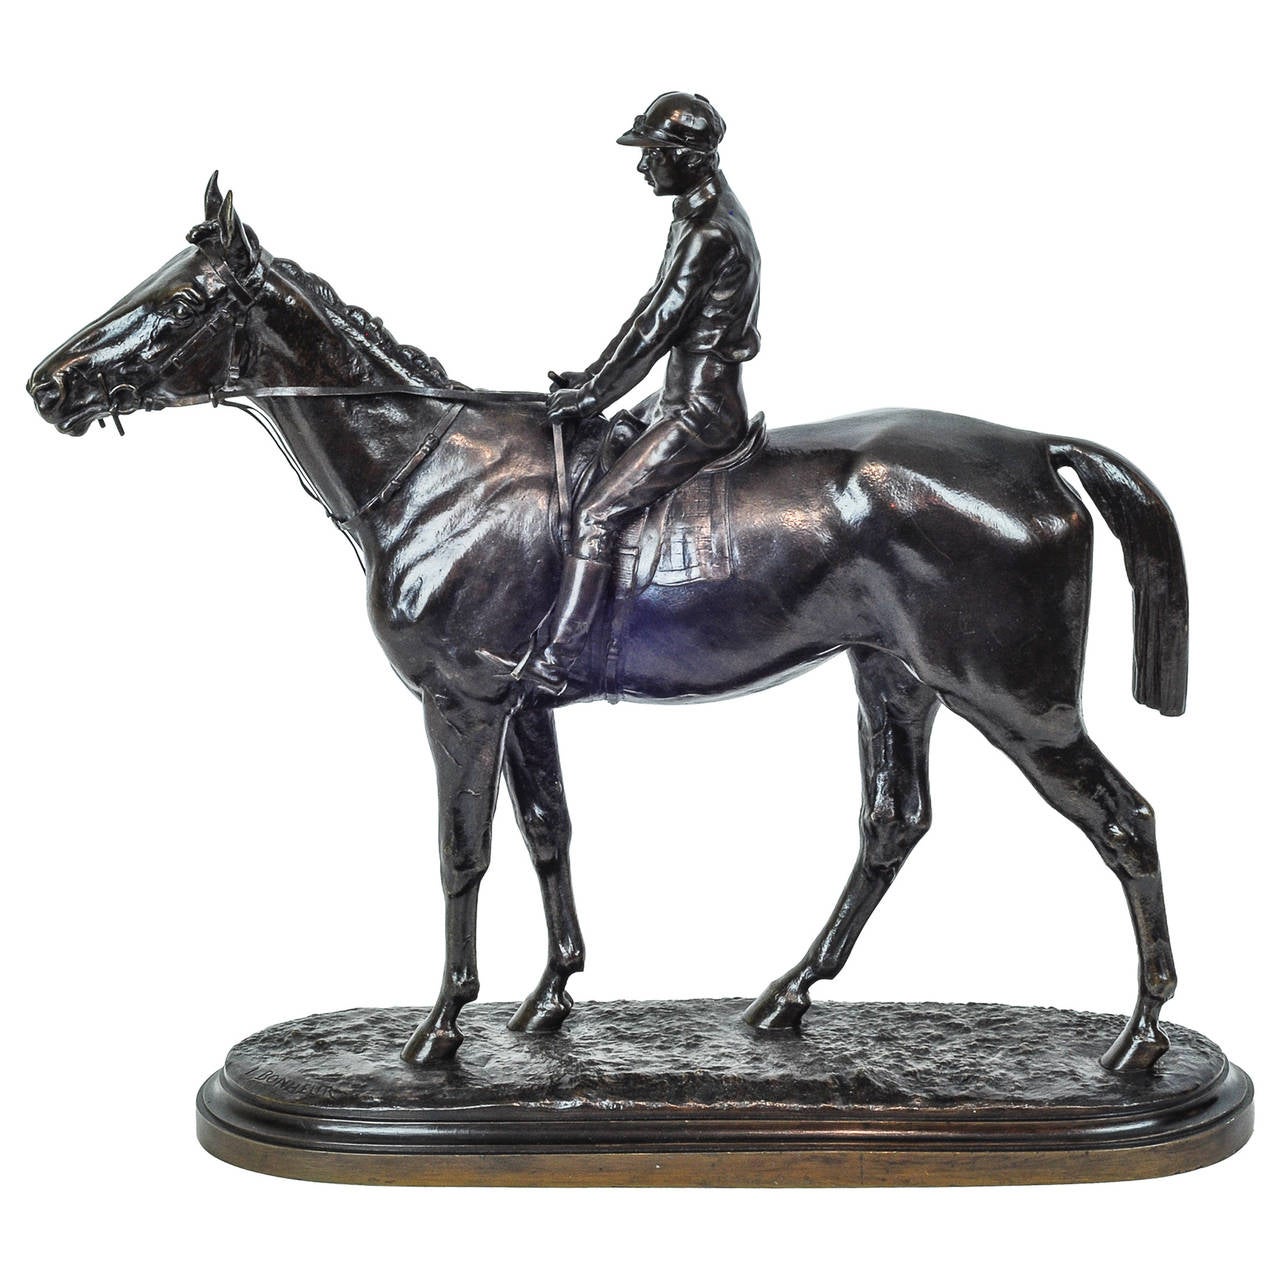 A Patinated Bronze Figure of a Jockey on Horse signed I. BONHEUR ,
stamped PEYROL and inscribed Boudet 43 Bd. Des Capucines.
Cast by Hippolyte Peyrol from a model by Isidore Bonheur .
Retailed by Maison Boudet, Paris Last quarter 19TH century